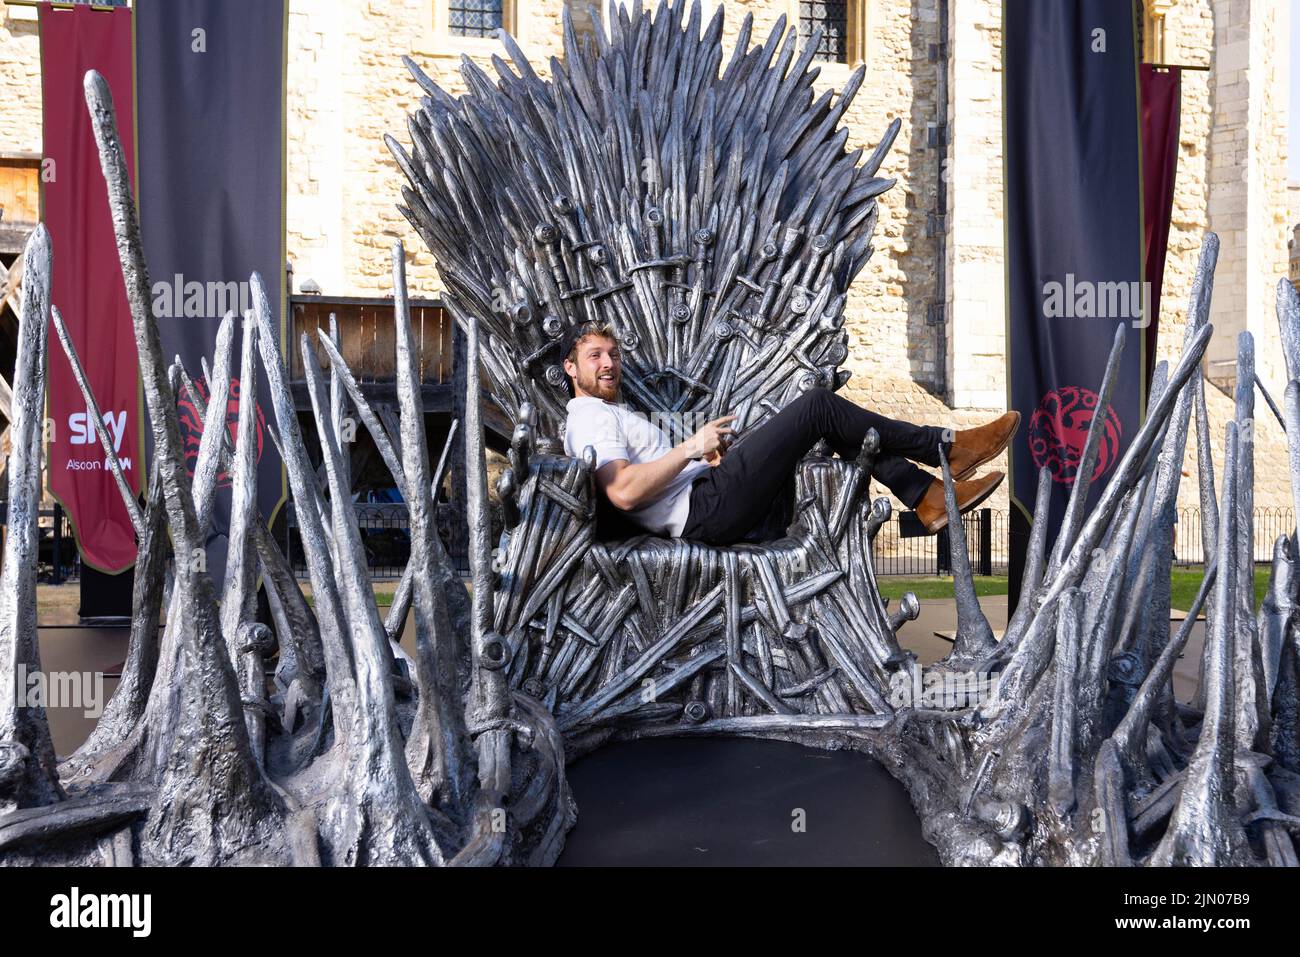 EDITORIAL USE ONLY Reality TV star Sam Thompson sits on the Iron Throne outside the Tower of London to mark the launch of the Game of Thrones prequel, House of the Dragon, airing on Sky and streaming service NOW from August 22. PA PHOTO Picture date: Monday August 8, 2022.. The throne is being displayed at the Tower of London today and tomorrow, ahead of the House of the Dragon premiere next week in Leicester Square. Fans and Visitors to the Tower of London will be able to discover more about the news series via a QR code next to the Iron Throne. The Throne will then be touring the country, in Stock Photo